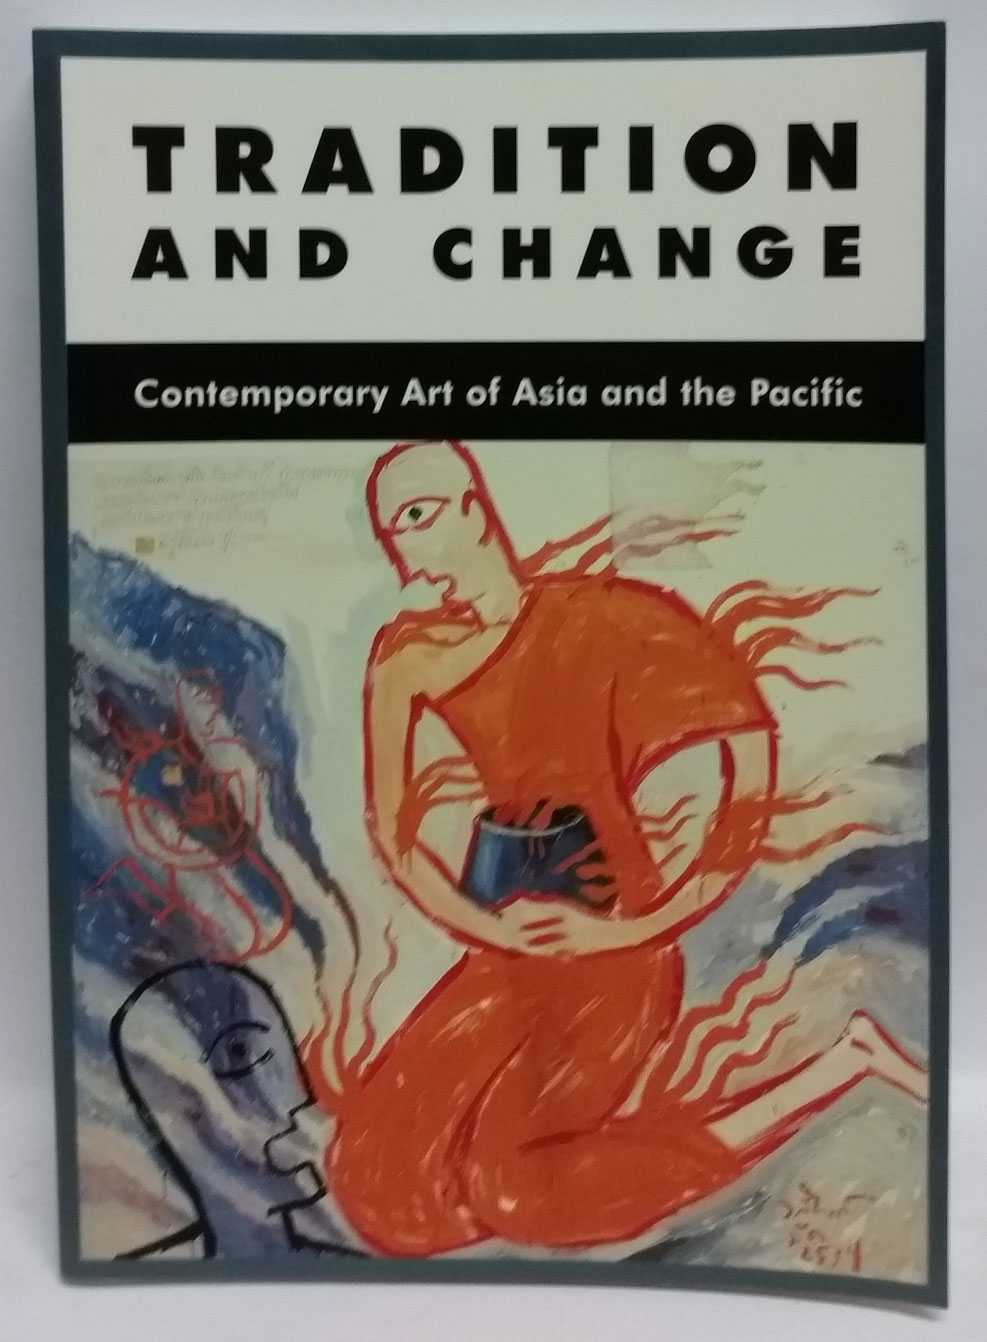 Caroline Turner - Tradition and Change: Contemporary Art of Asia and the Pacific